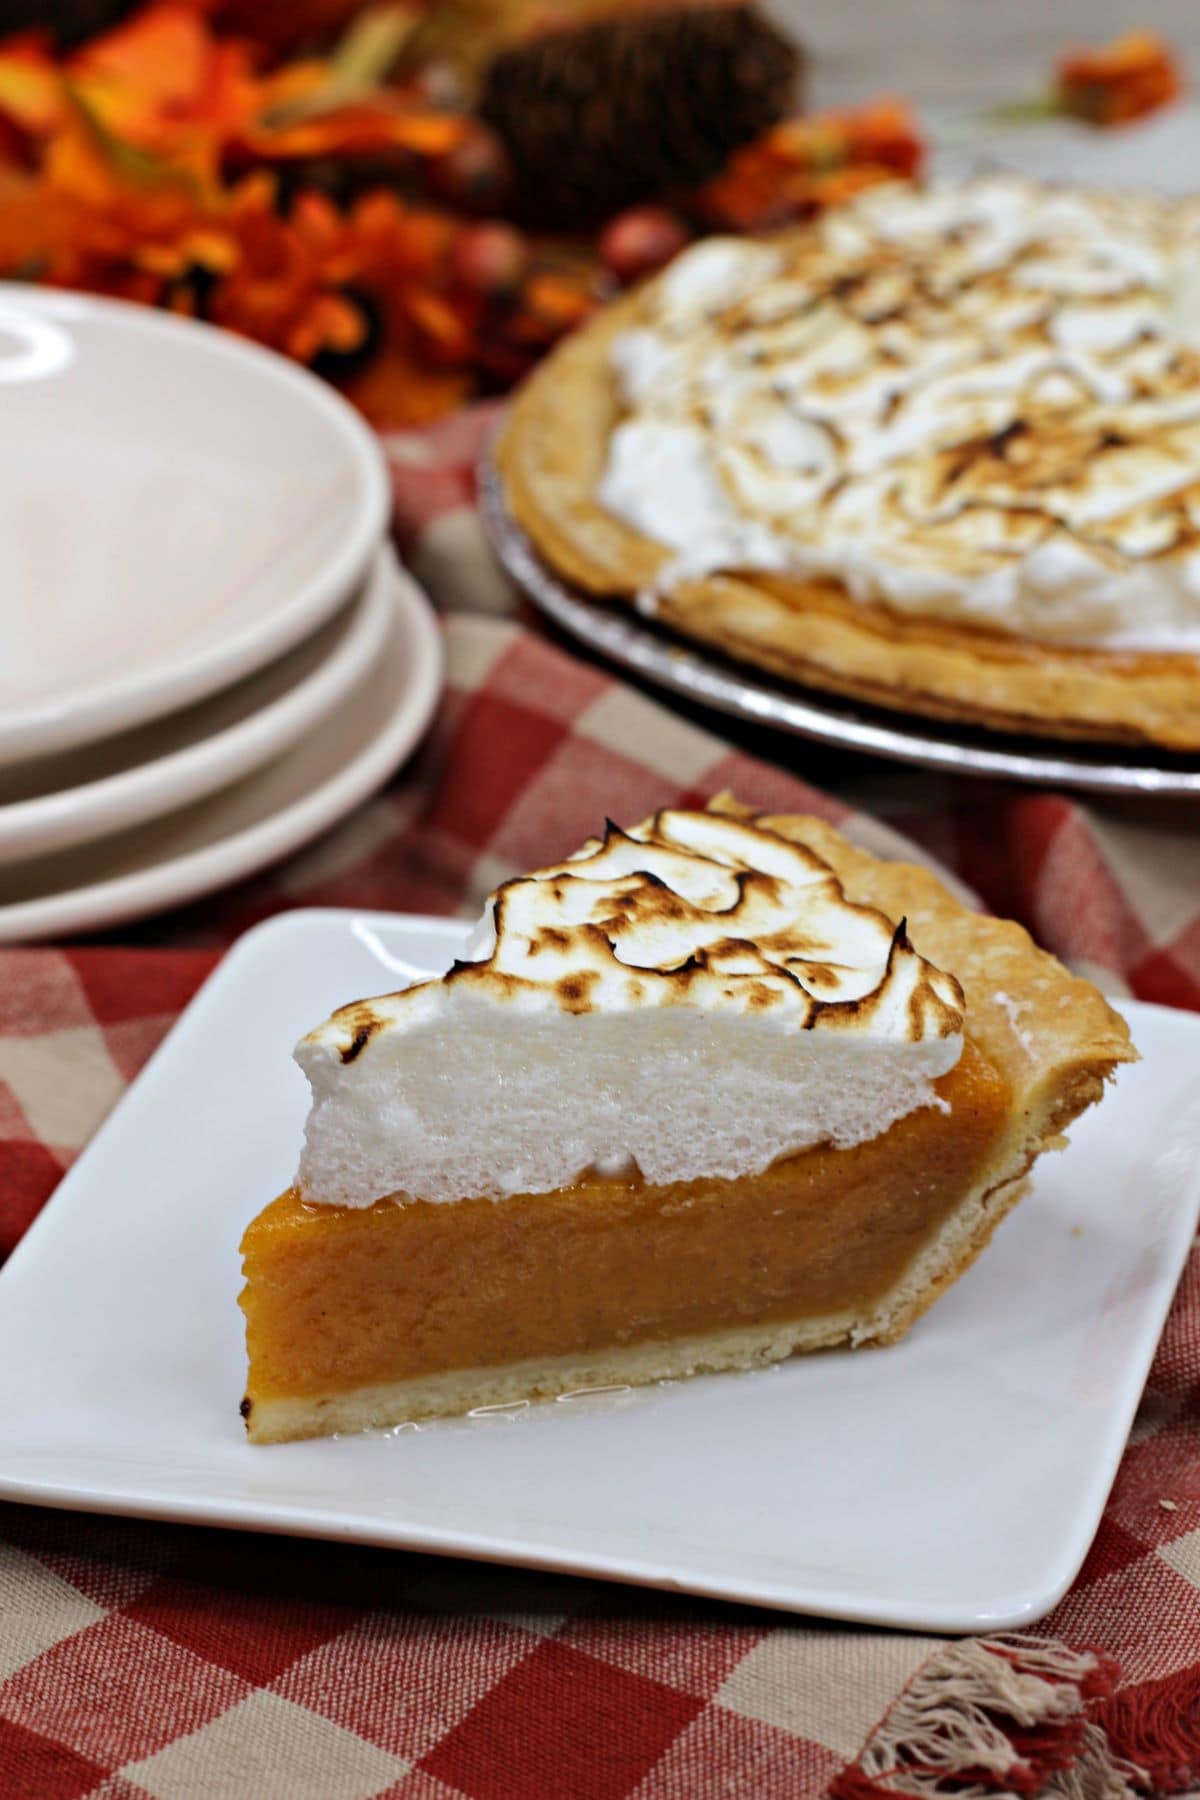 A slice of the Sweet Potato Pie Recipe with Marshmallow Meringue on a patterned cloth.